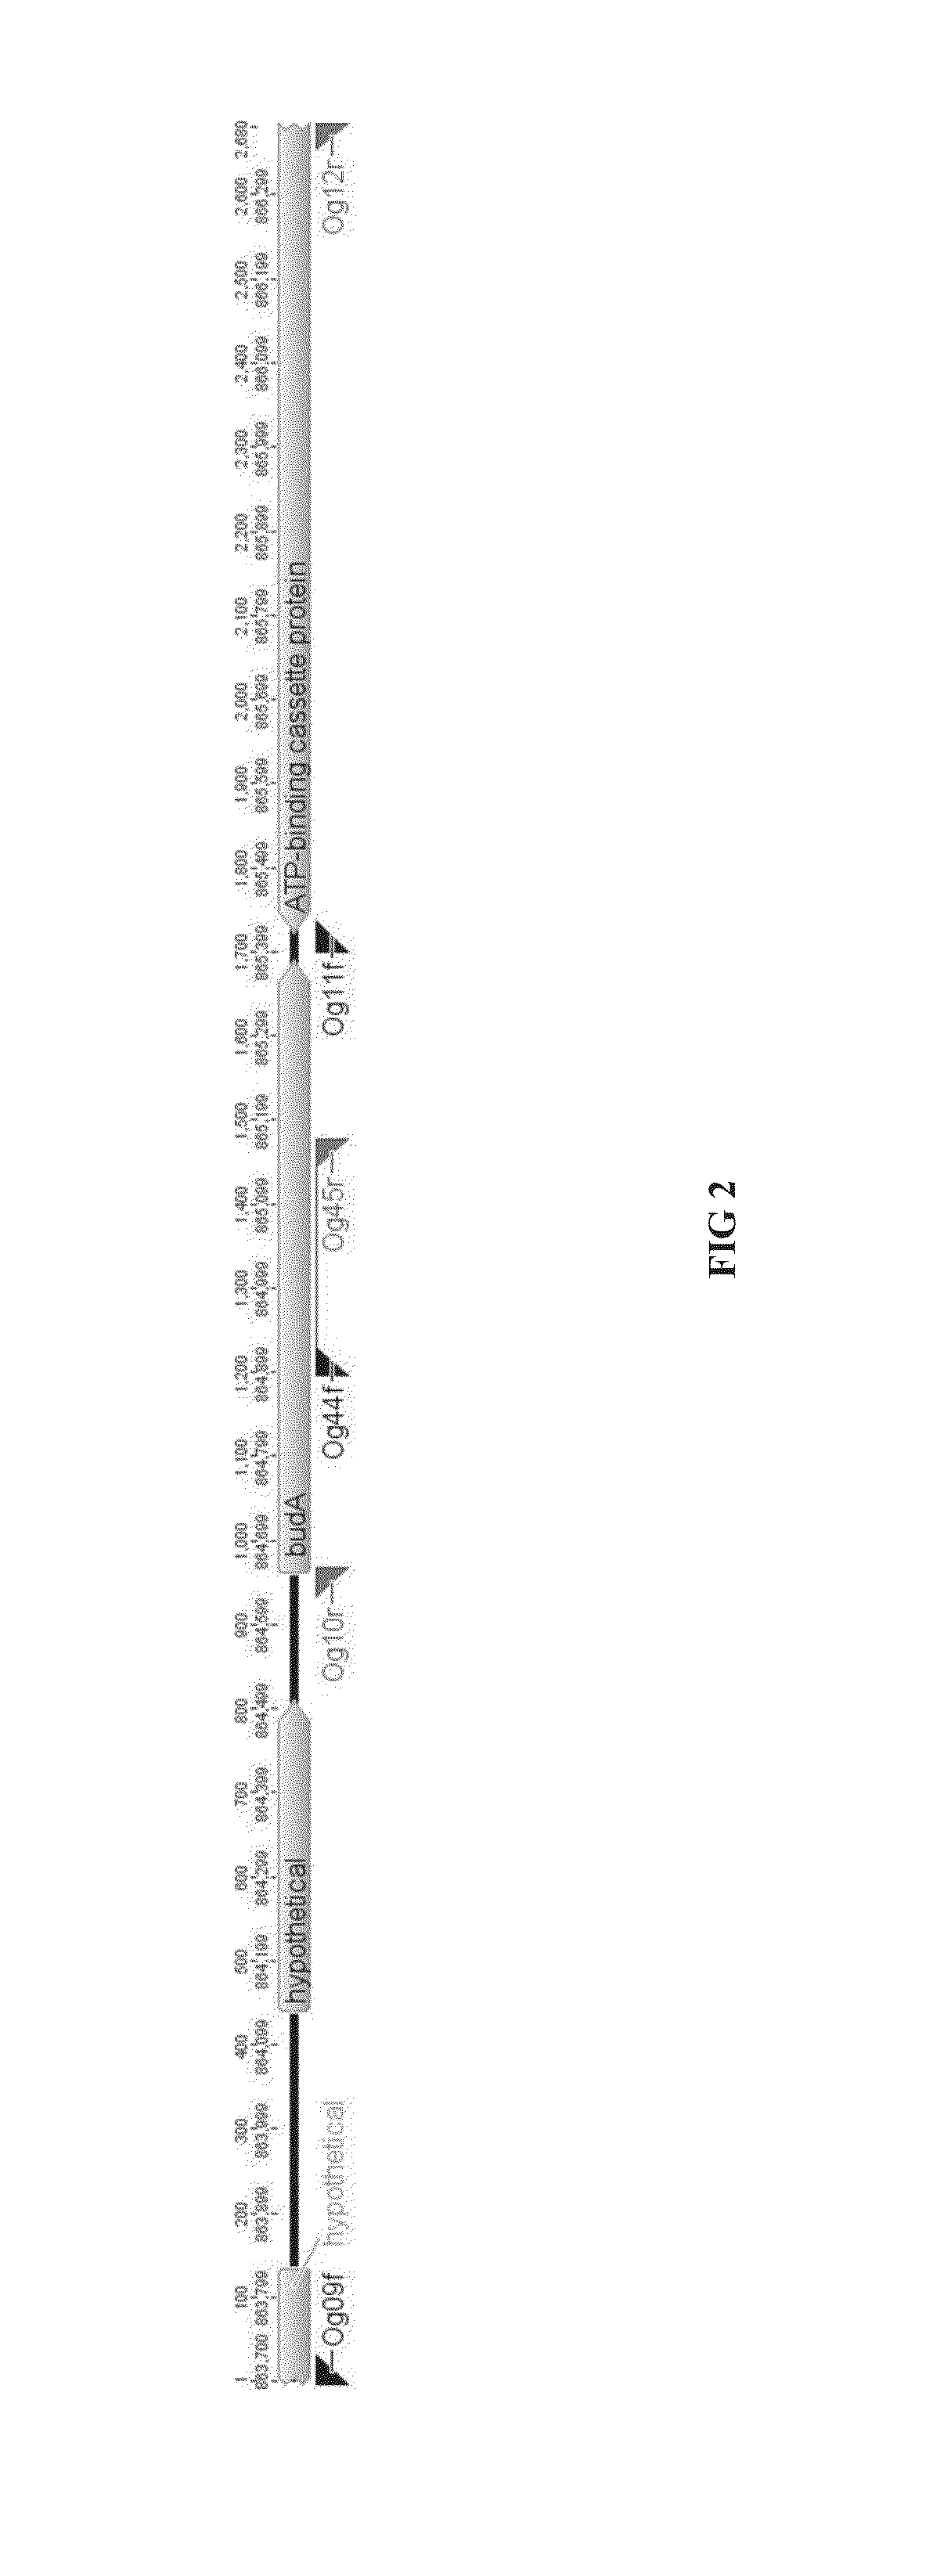 Recombinant microorganisms and methods of use thereof